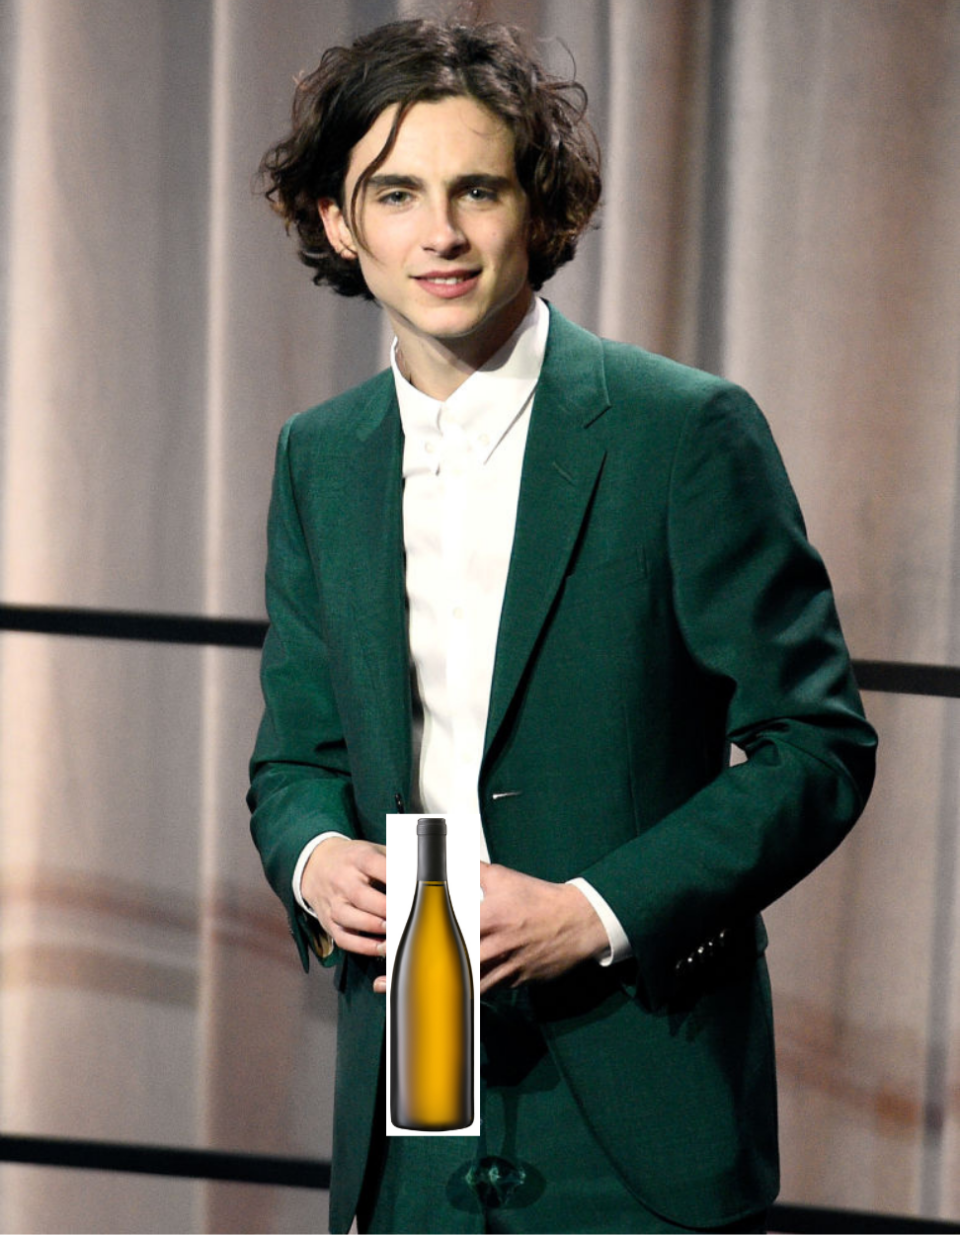 Timmy in a suit with a photo of a bottle of wine added between his hands